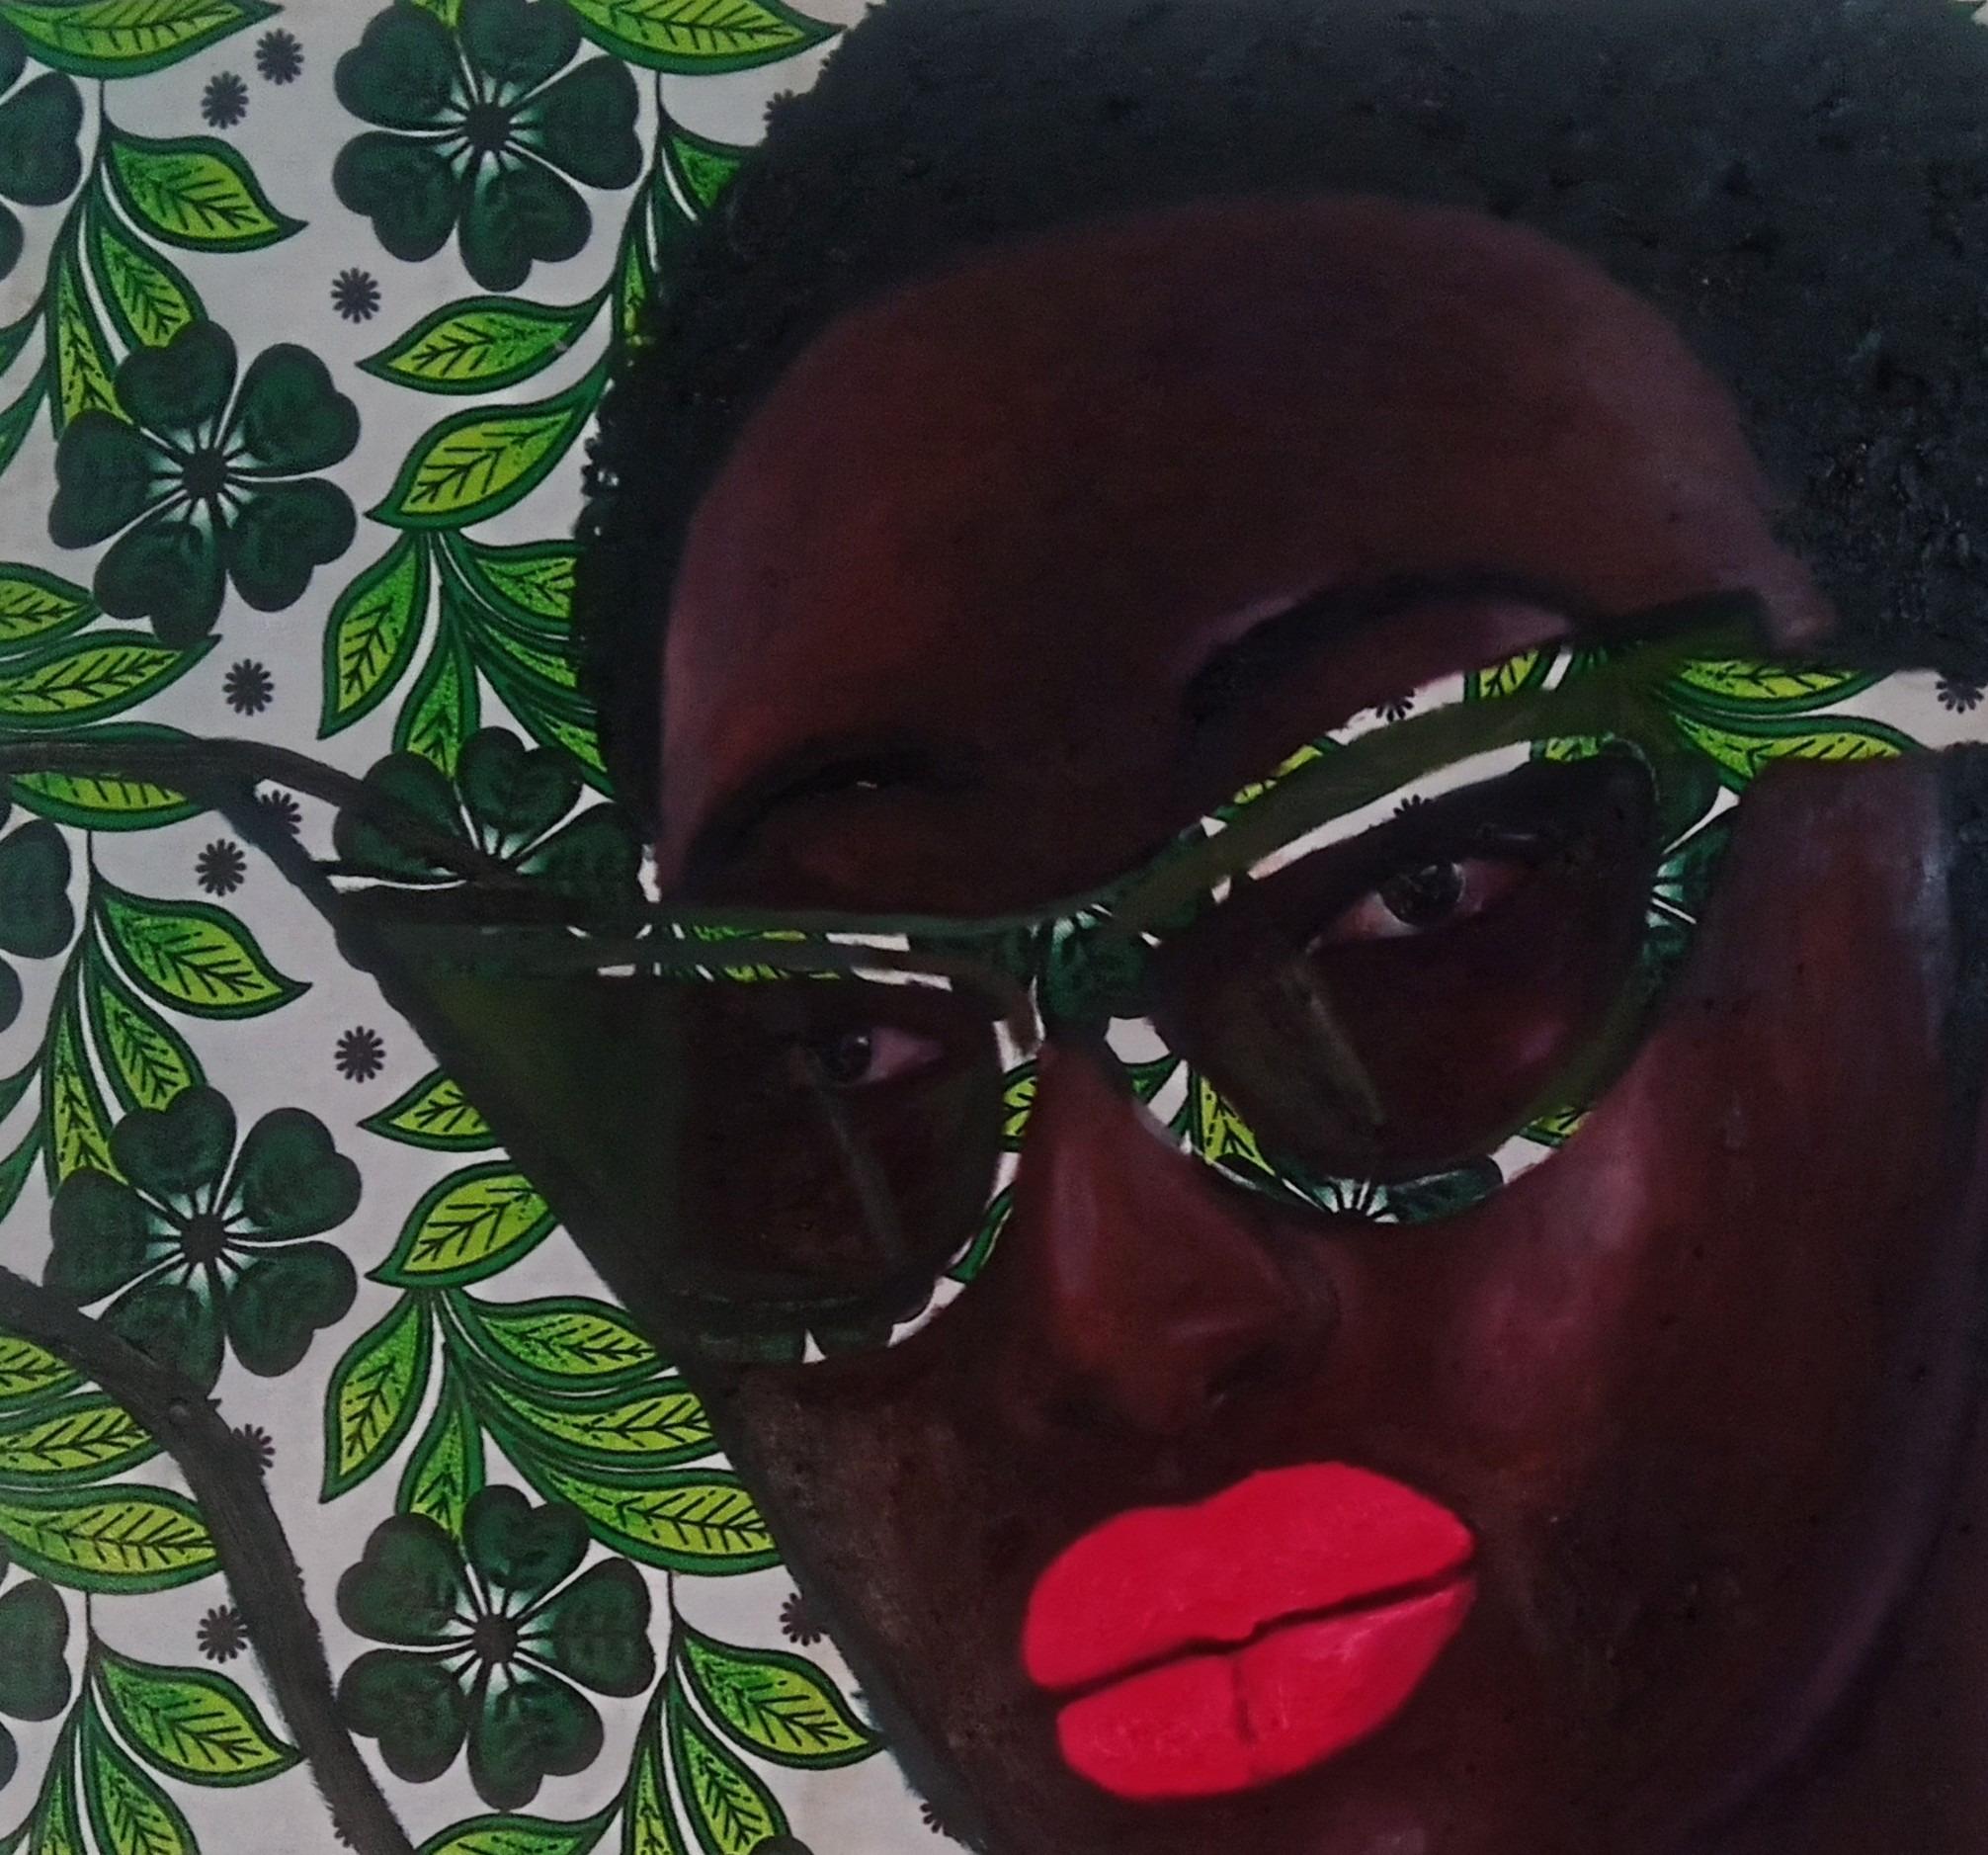 Beauty in Her Space - Painting by Bakare Abubakri-sideeq Babatunde